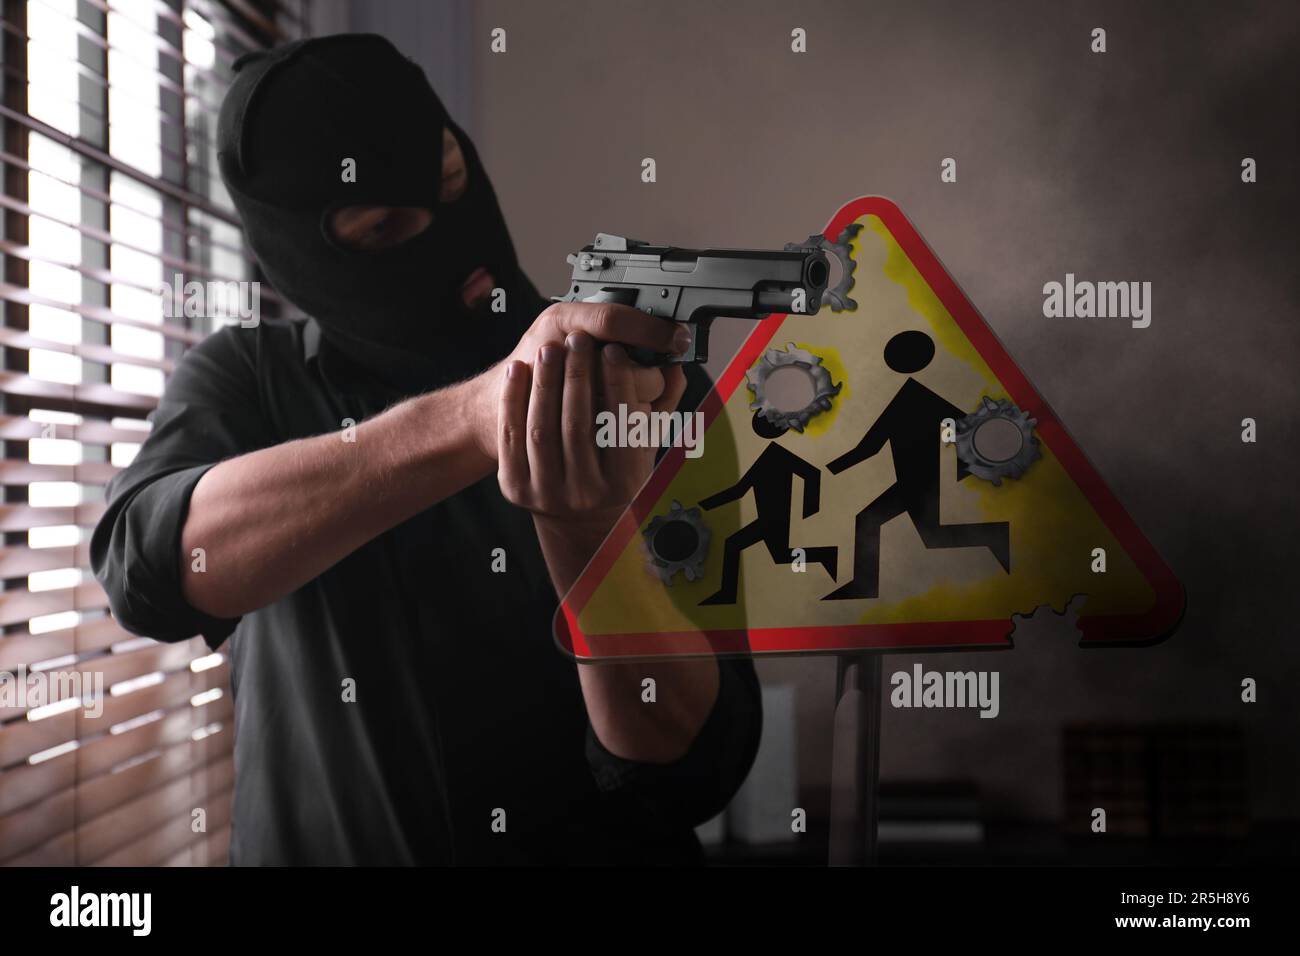 School shooting. Man in mask holding gun in classroom. Warning road sign Children with bullet holes Stock Photo